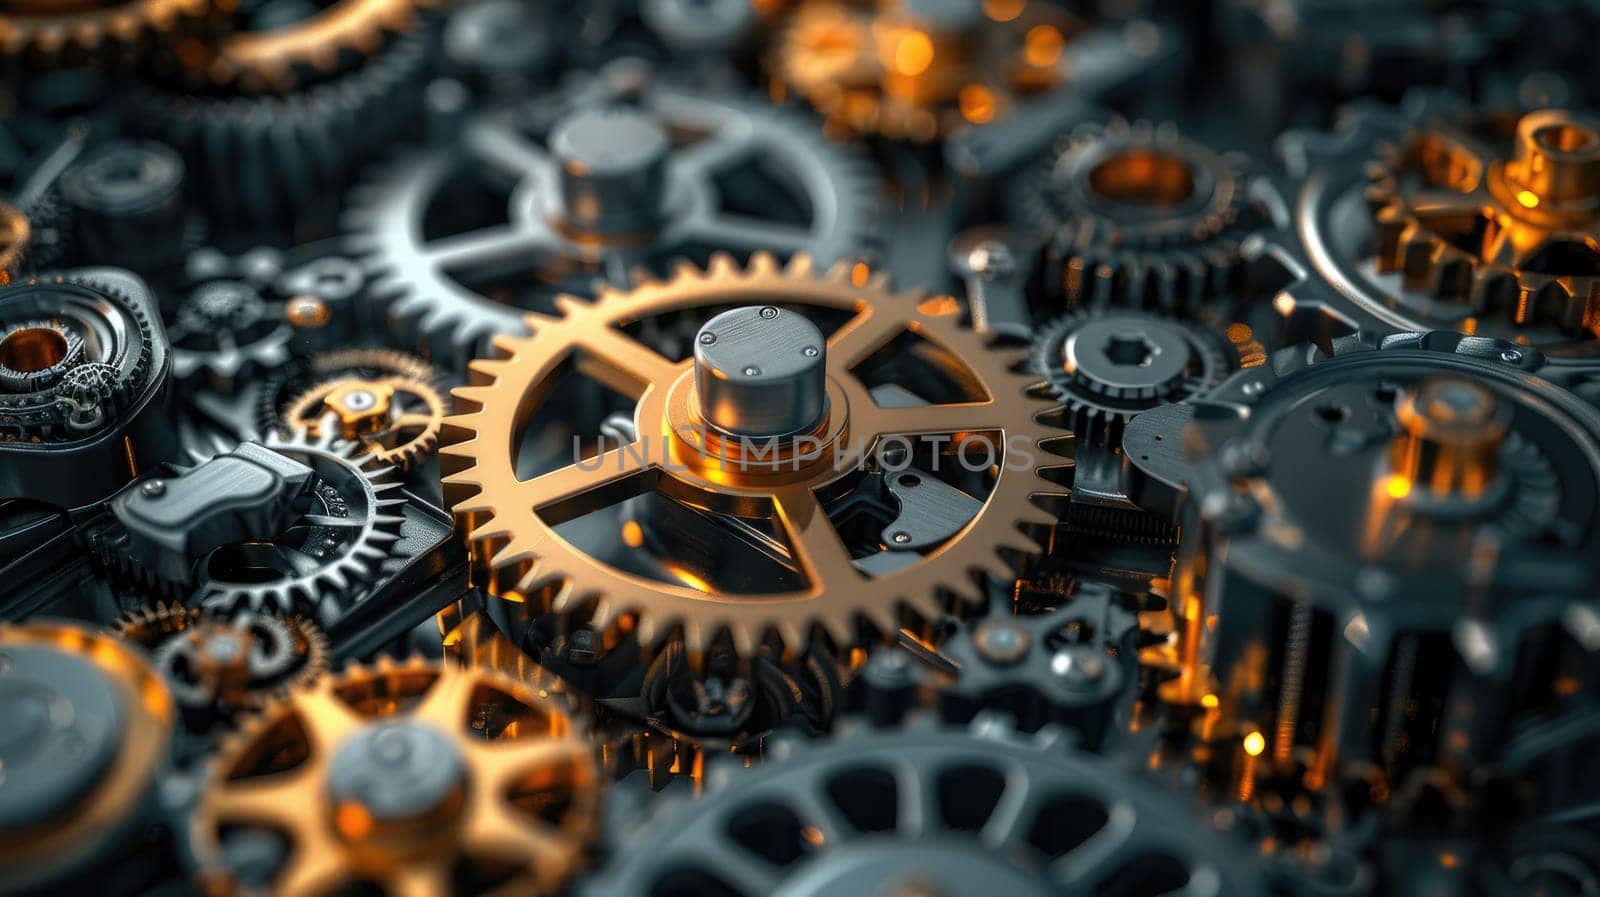 A close up of a large number of gears, some of which are gold. Concept of complexity and intricacy, as the gears are interlocked and interwoven in a way that suggests a well-designed machine